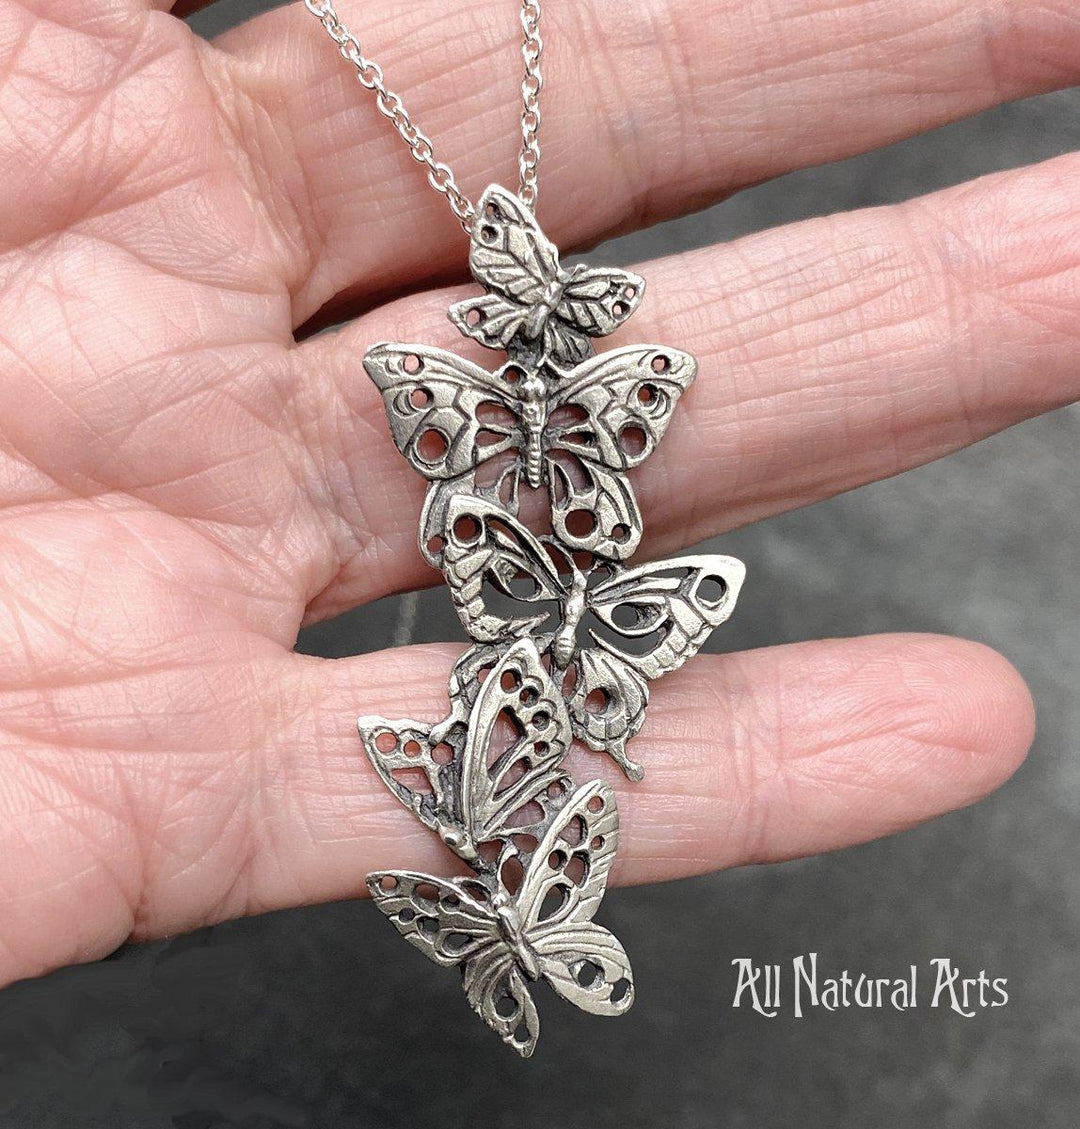 A close up photo of a person holding Ascending Butterflies Necklace by Sue Beatrice of All Natural Arts. Solid sterling silver filigree design with 5 ascending butterflies on an 18-inch chain.